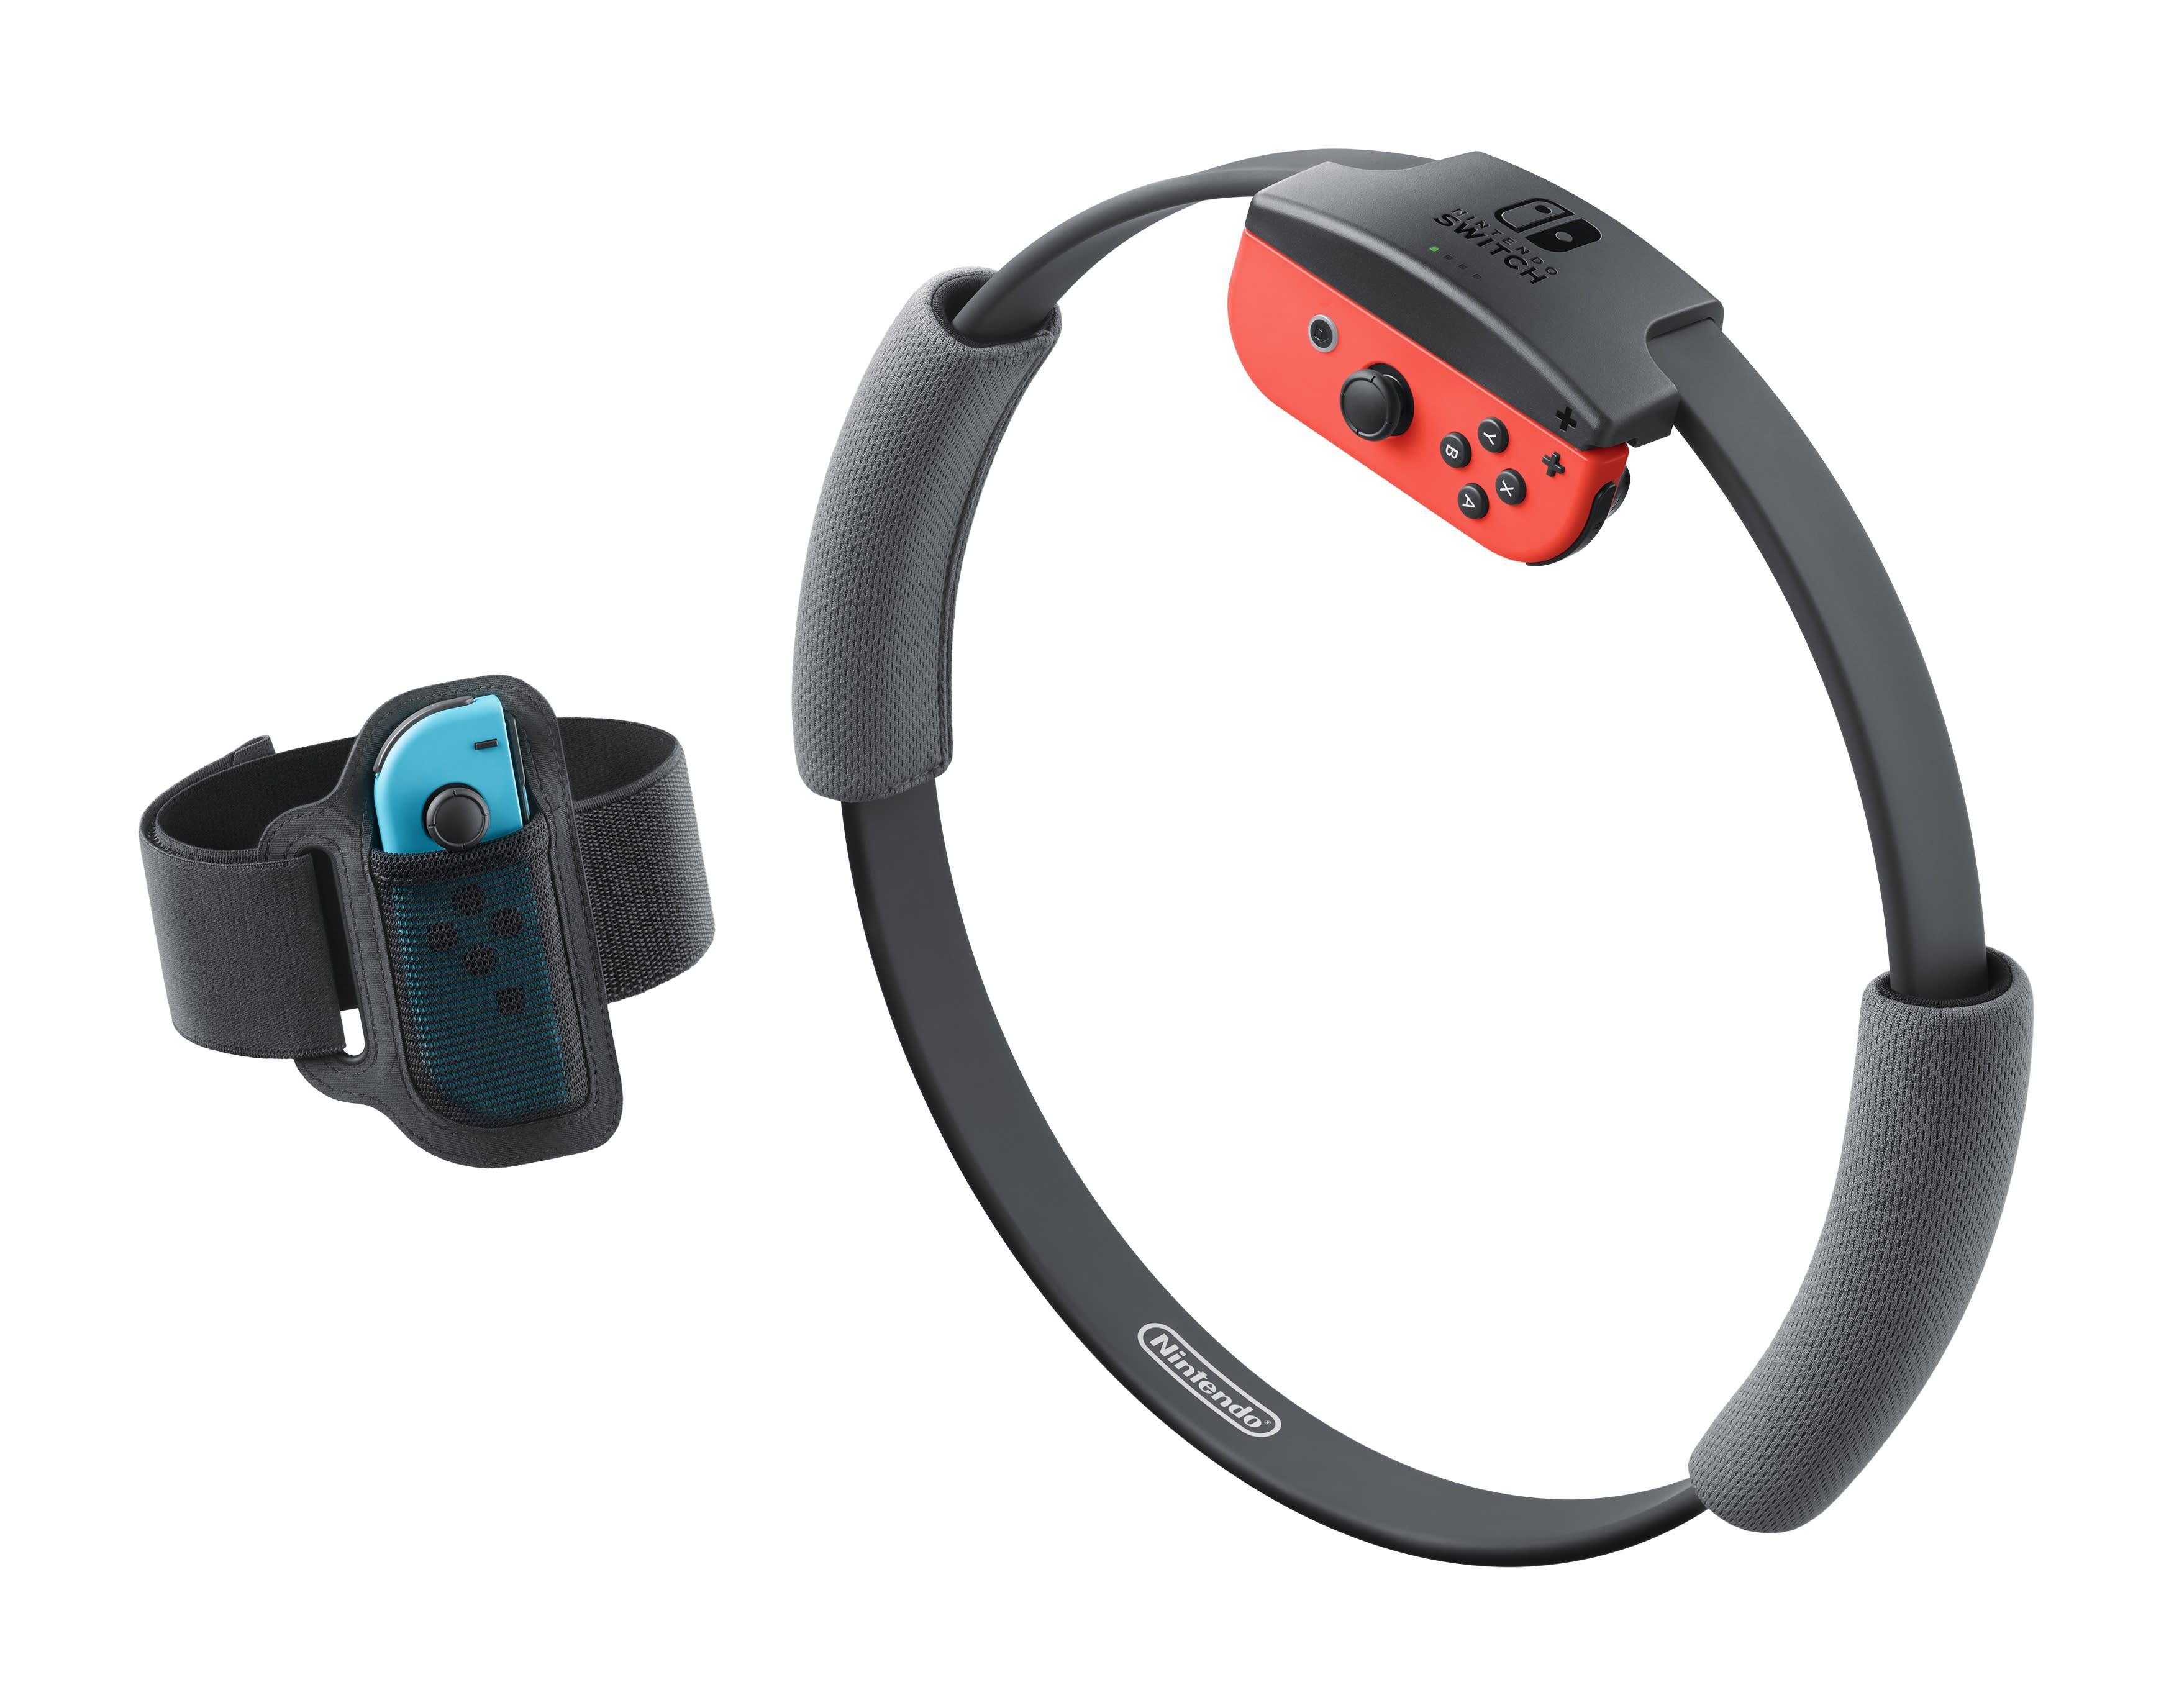 Nintendo's Ring Fit Adventure is like Wii Fit for the Switch - CNET